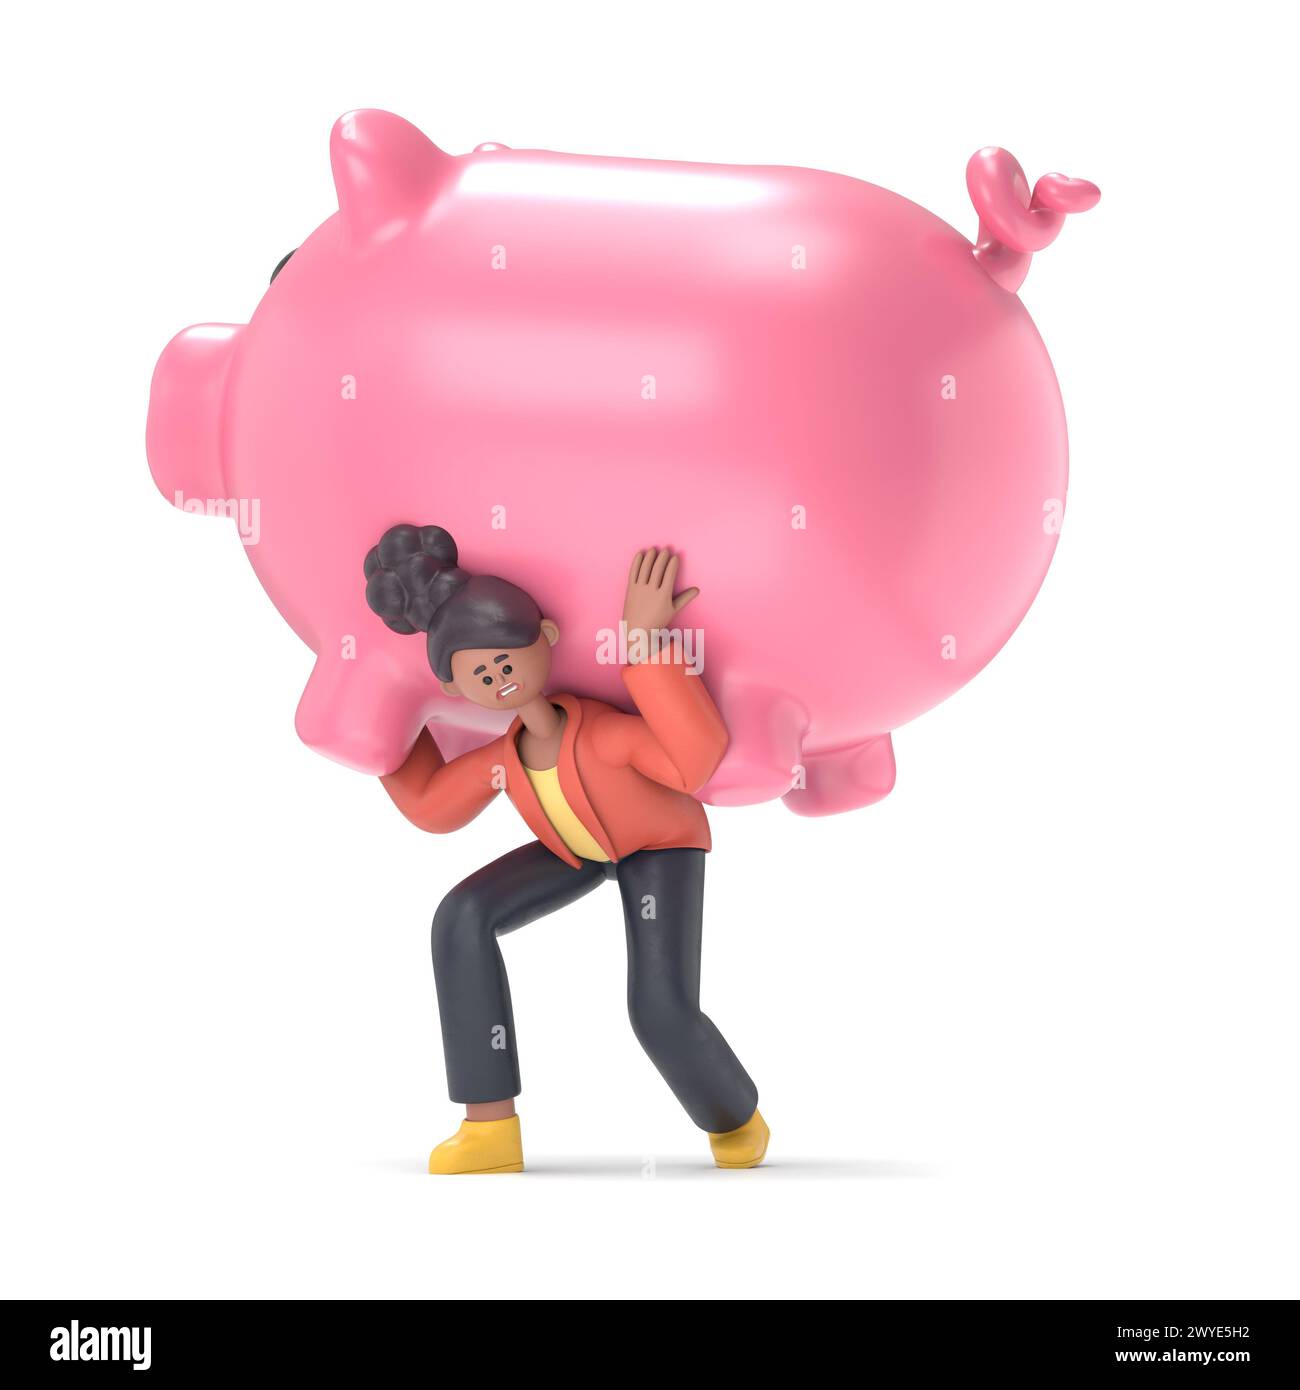 Save money concept - 3D illustration of businessman carrying big piggy bank on his shoulders.3D rendering on white background. Stock Photo